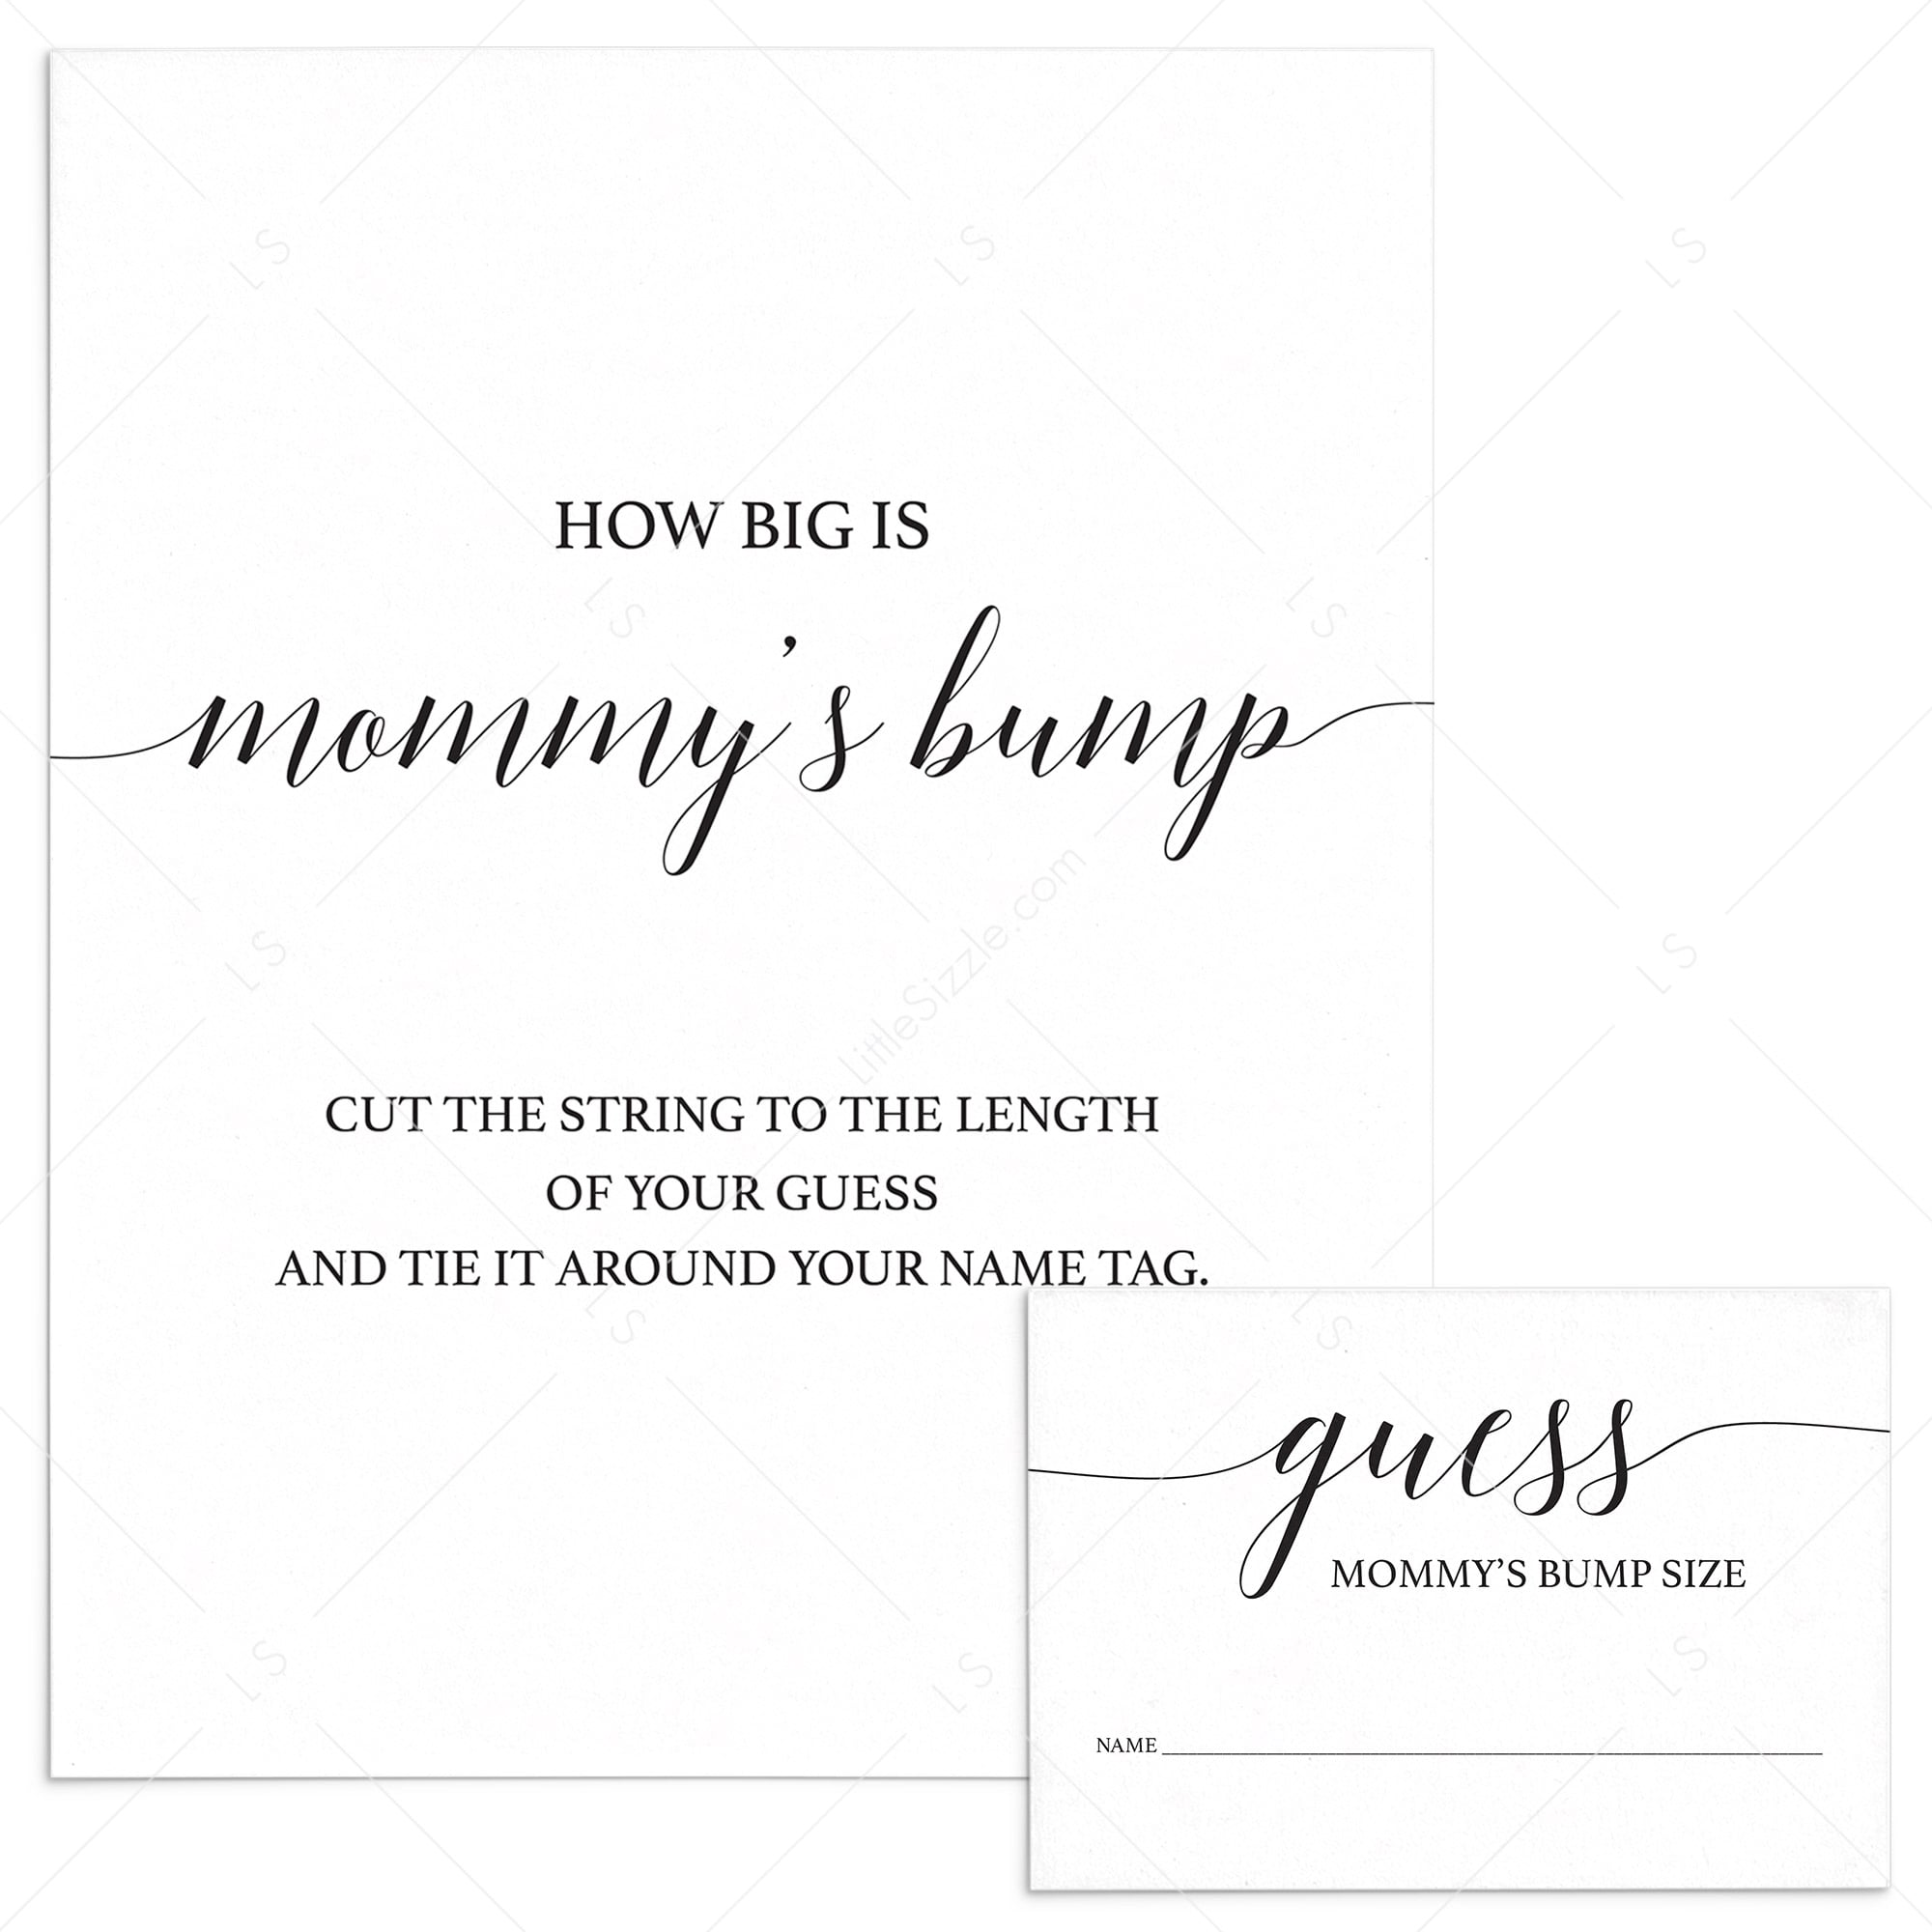 How Big Is Mommy's Bump Game Simple Baby Shower Printable by LittleSizzle